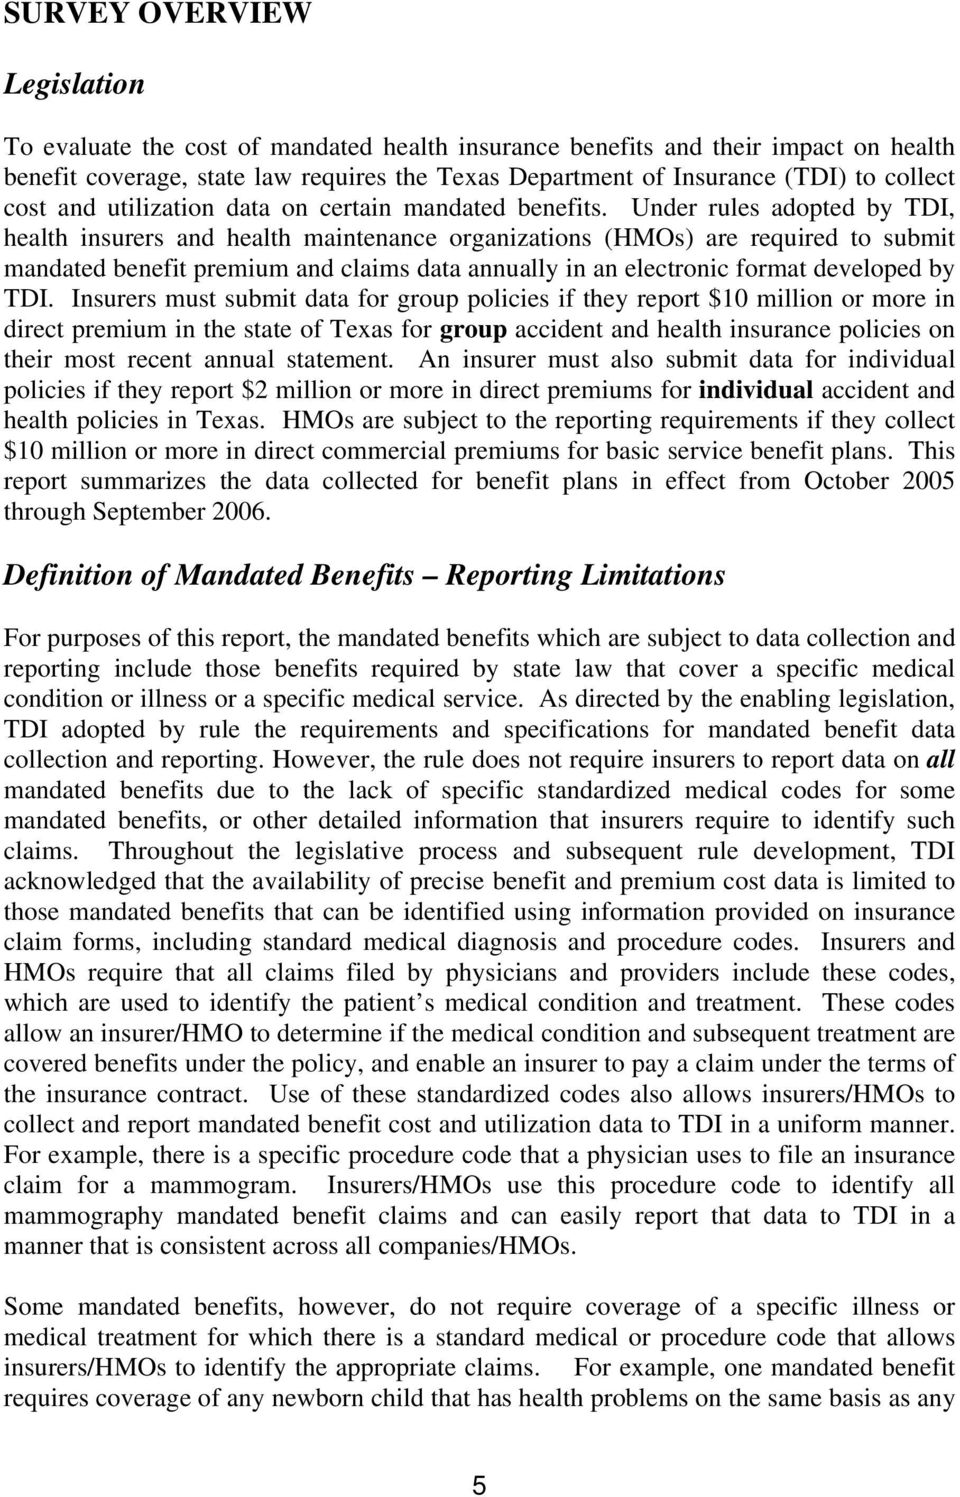 Under rules adopted by TDI, health insurers and health maintenance organizations (HMOs) are required to submit mandated benefit premium and claims data annually in an electronic format developed by